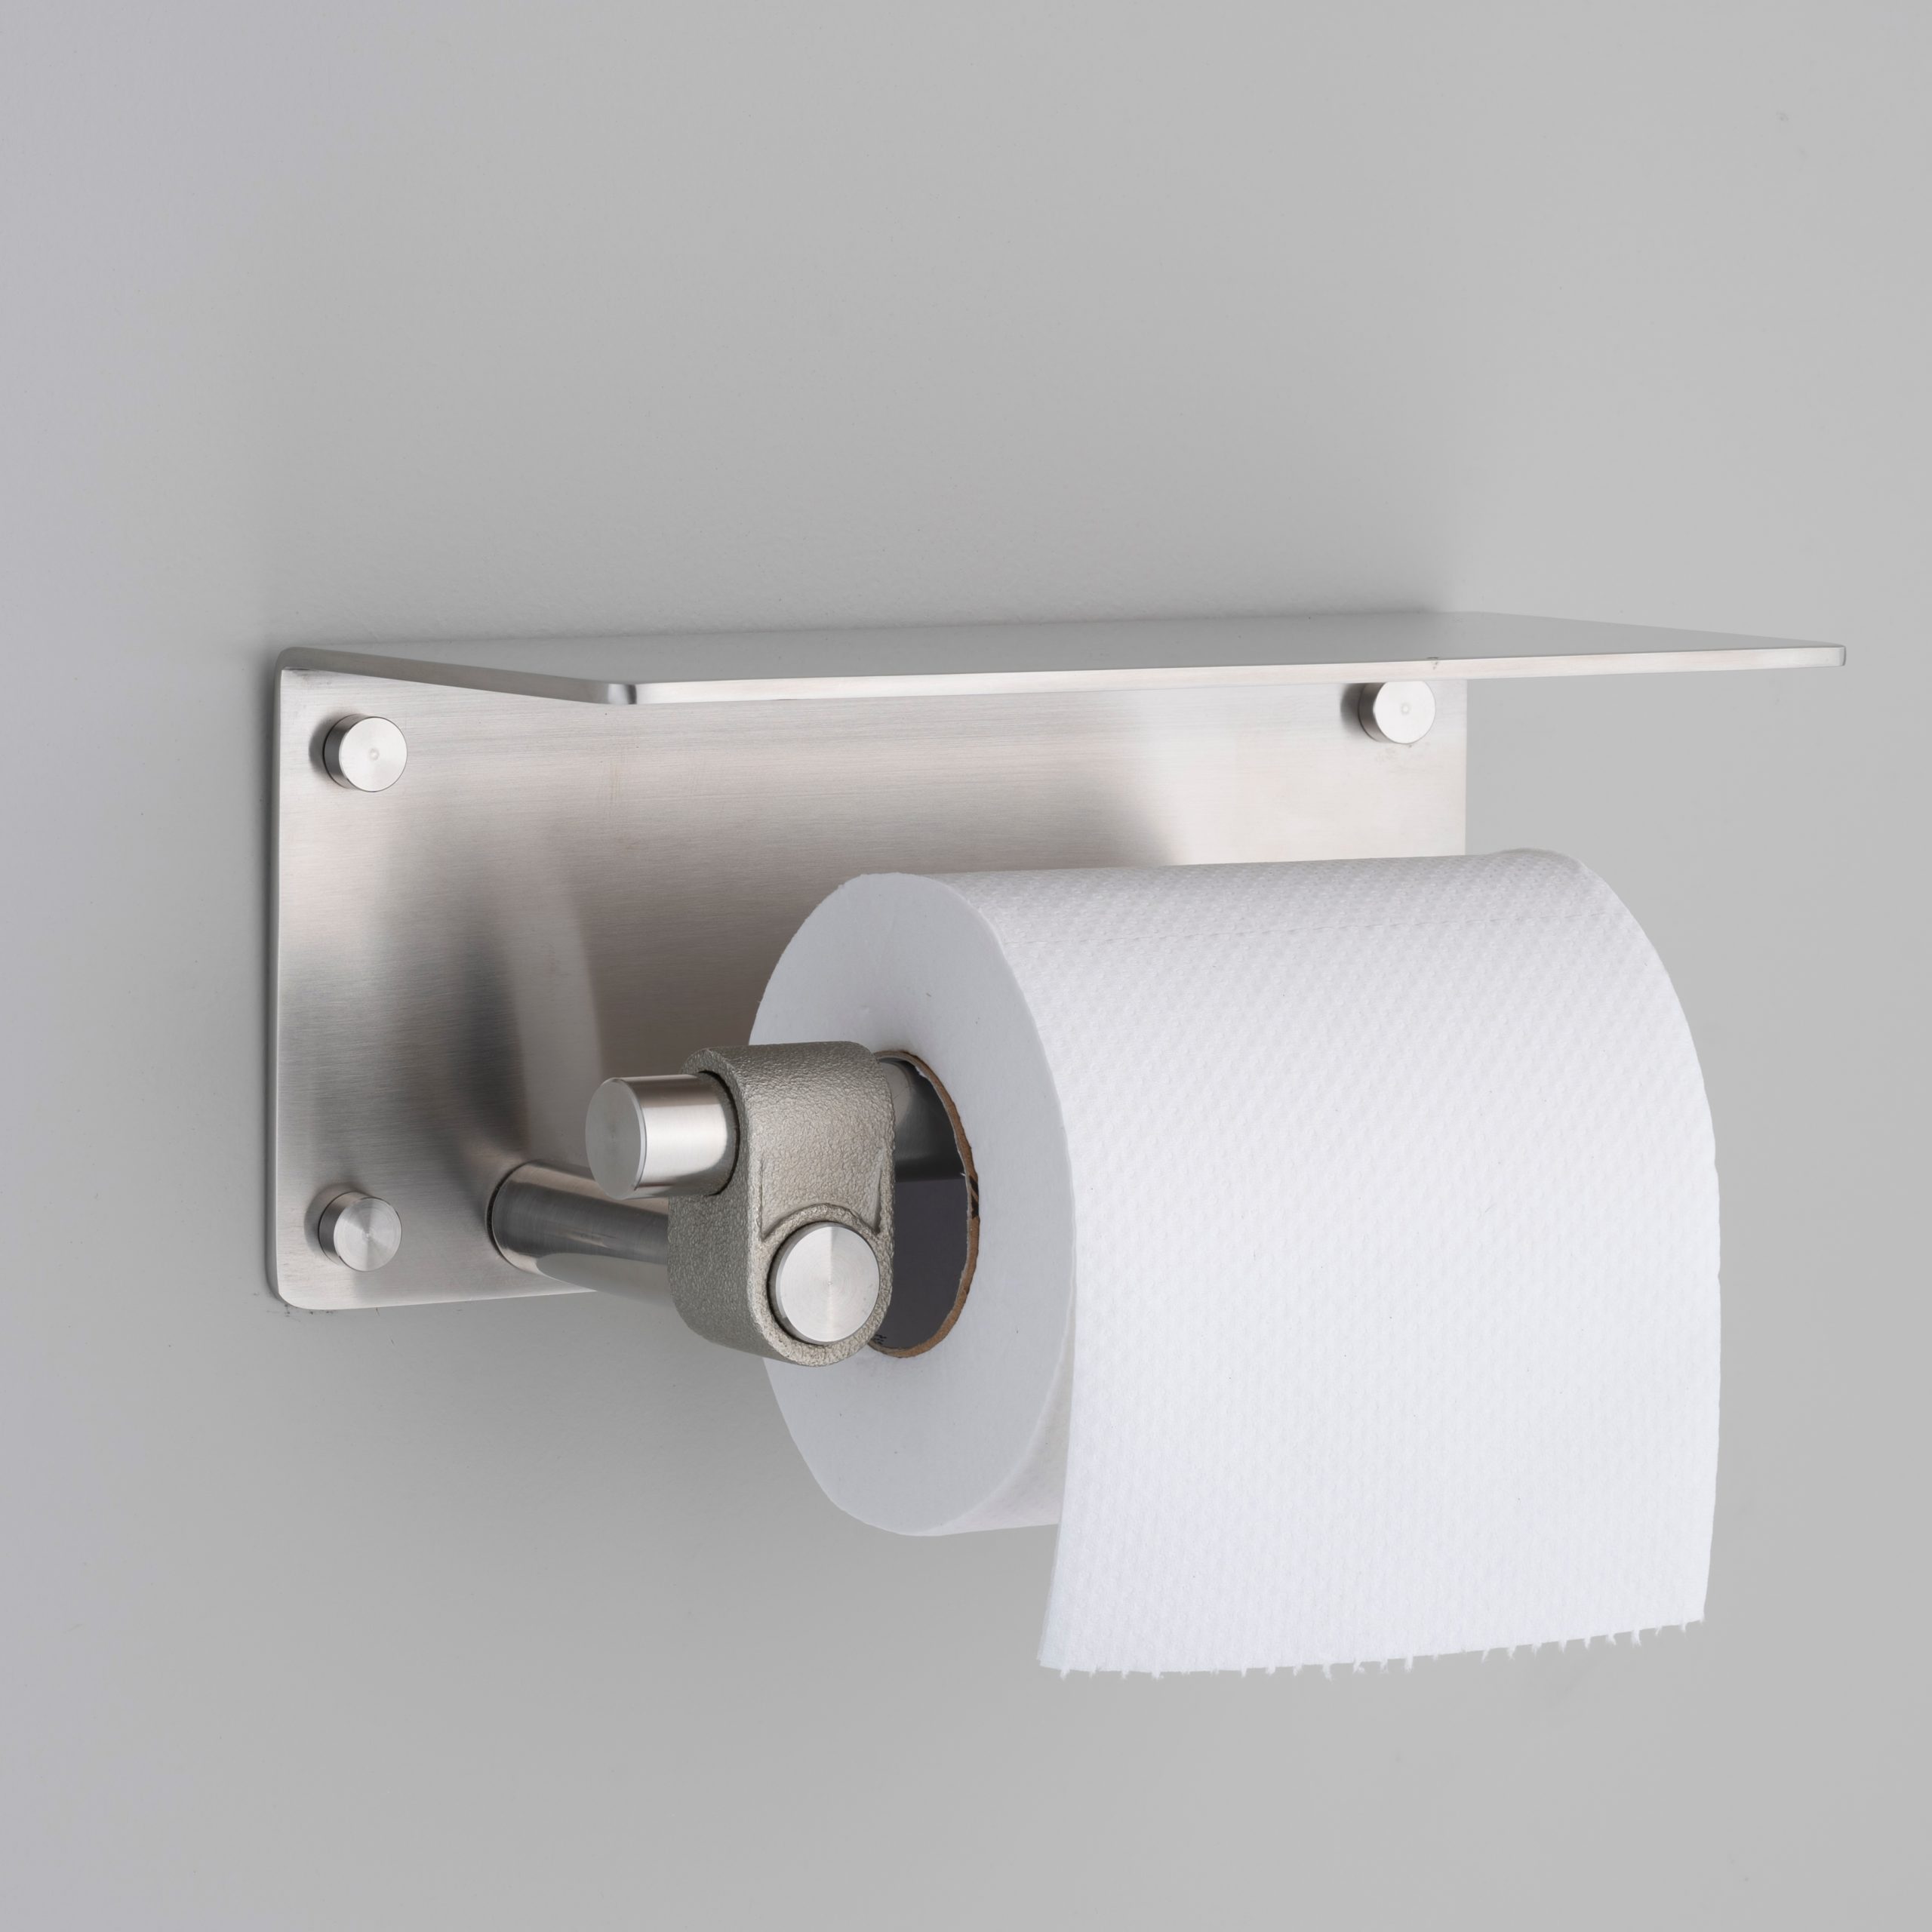 TOILET ROLL HOLDER / WITH SHELF / CAST / BRASS - Buster + Punch